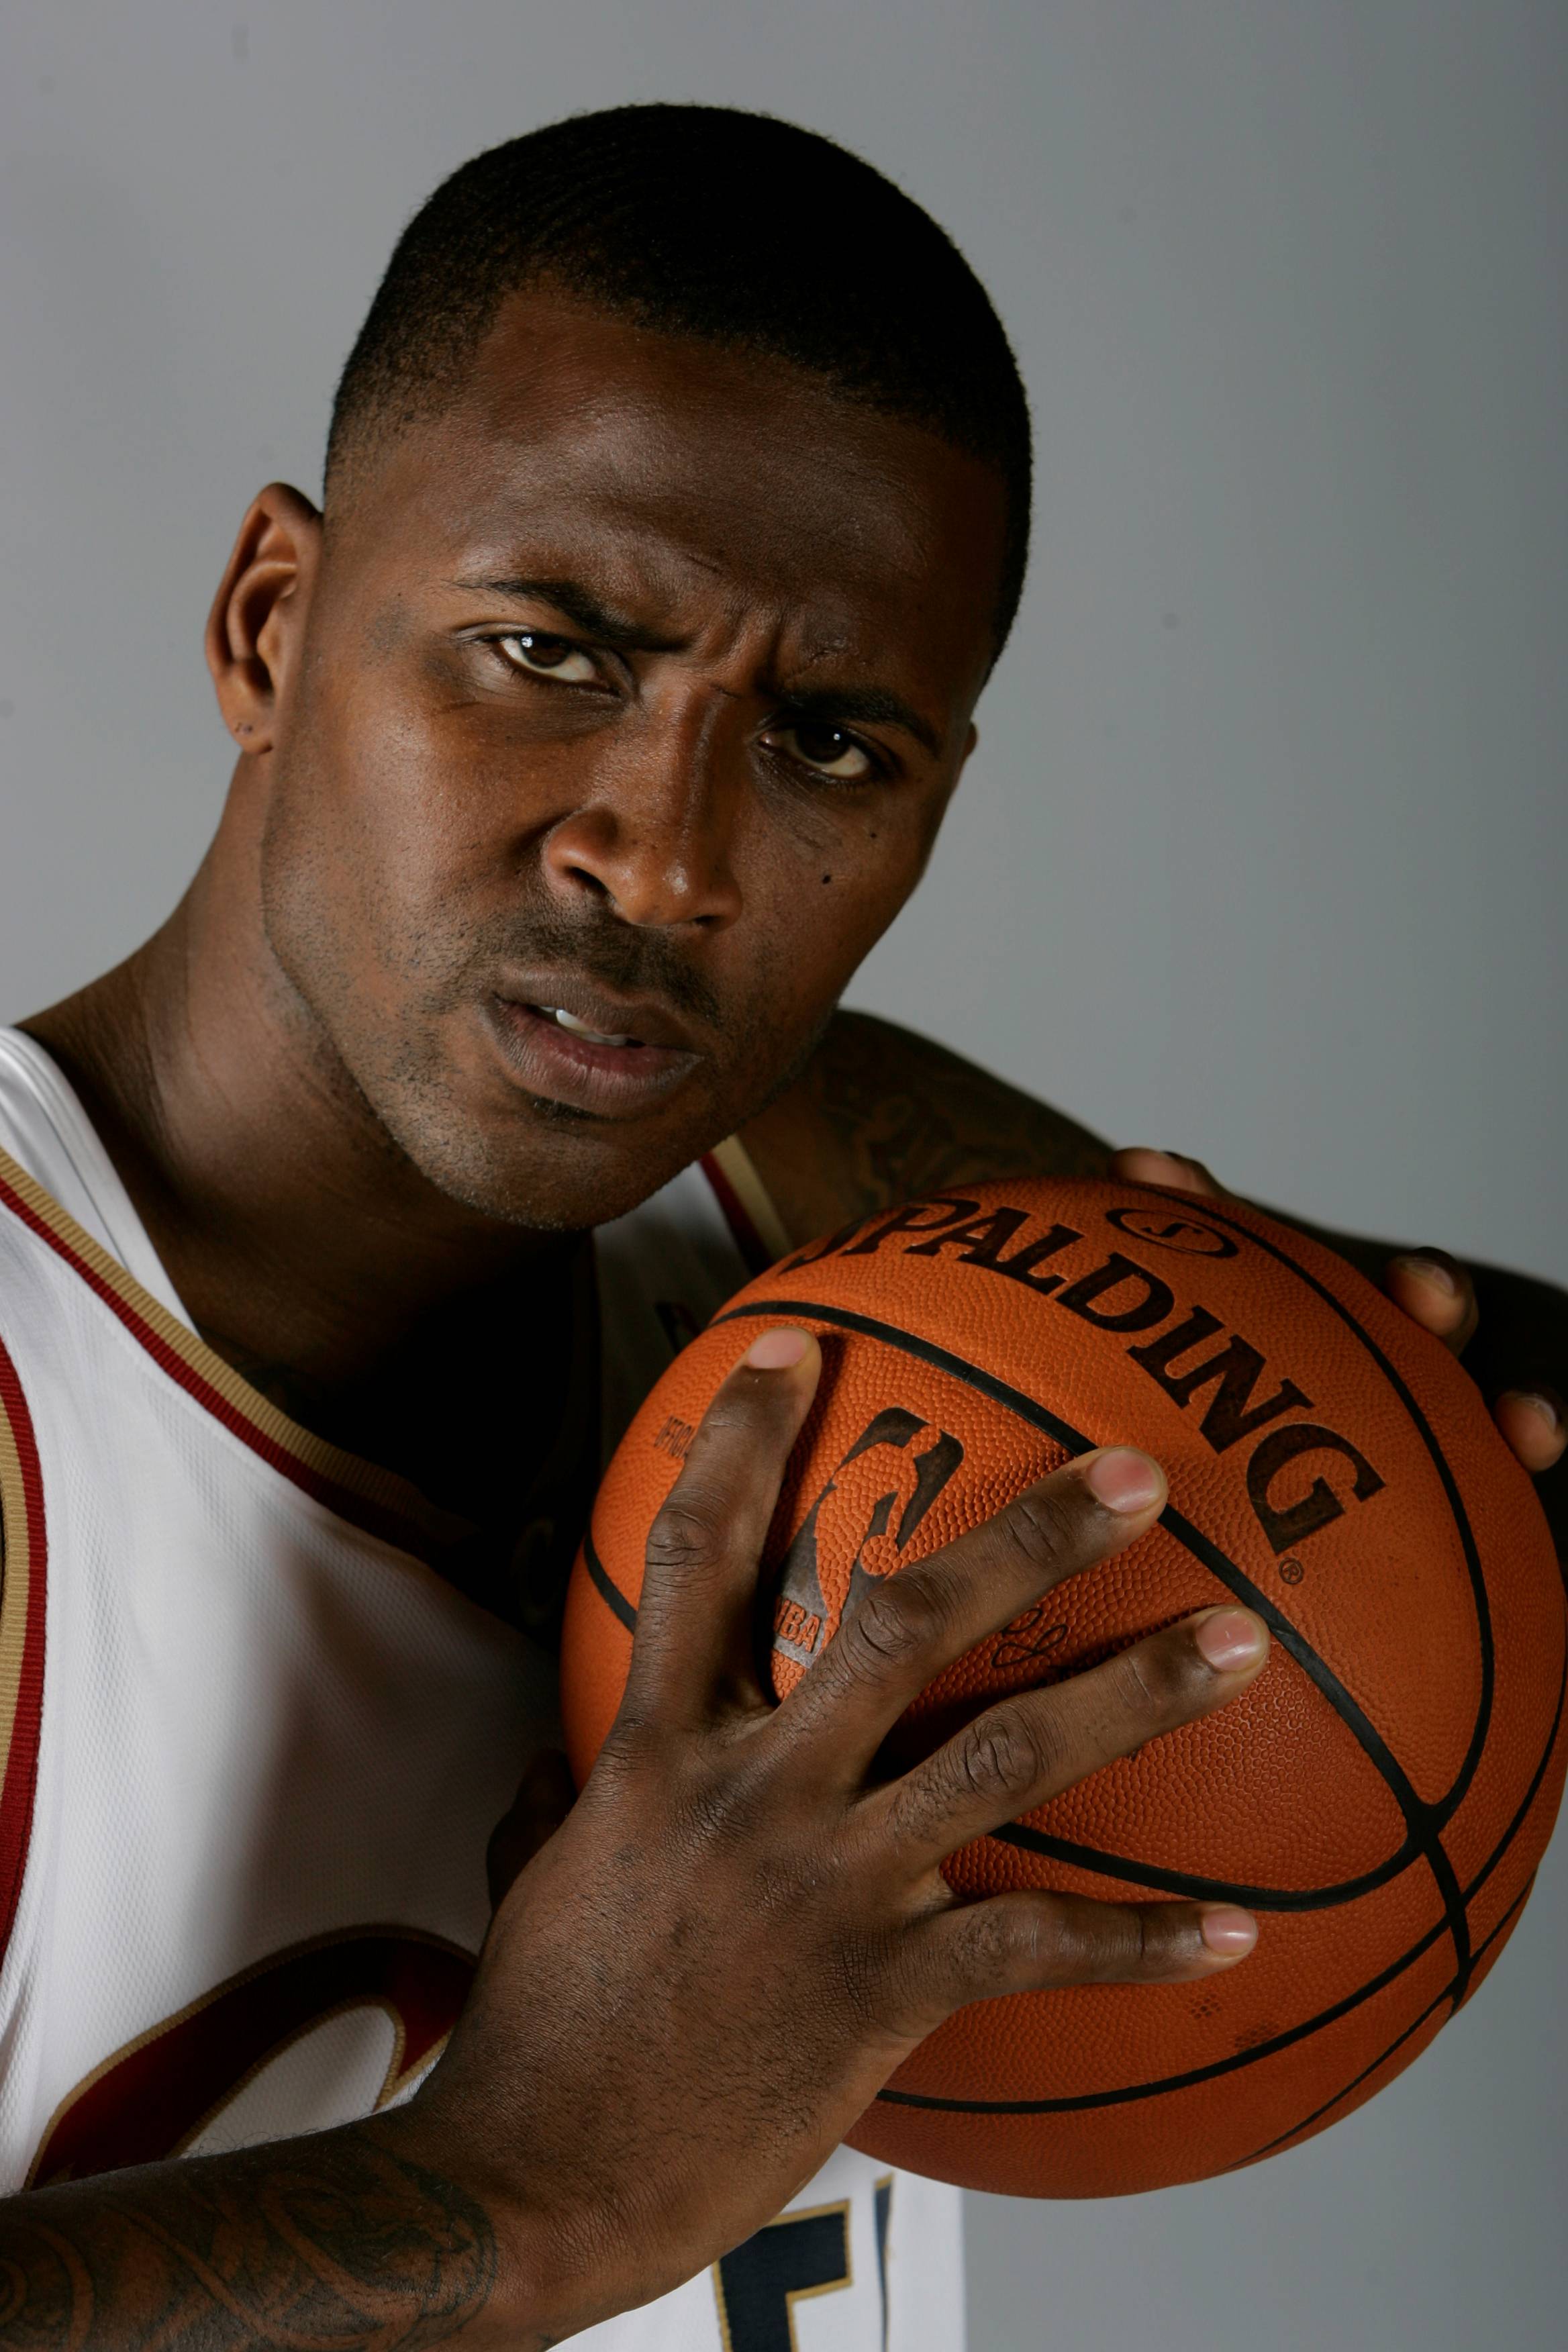 Ex-NBA Player Wright's Death Remains a Mystery - It's been almost a year since former NBA player Lorenzen Wright was found dead in a secluded Memphis field and authorities still aren't close to making an arrest in the crime. Mistakes – which include a missing person's report that wasn't taken seriously, a botched 911 call and a relatively small reward – have hurt the case that remains unsolved since July 28, 2010.(Photo: AP Photo/Mark Duncan, File)